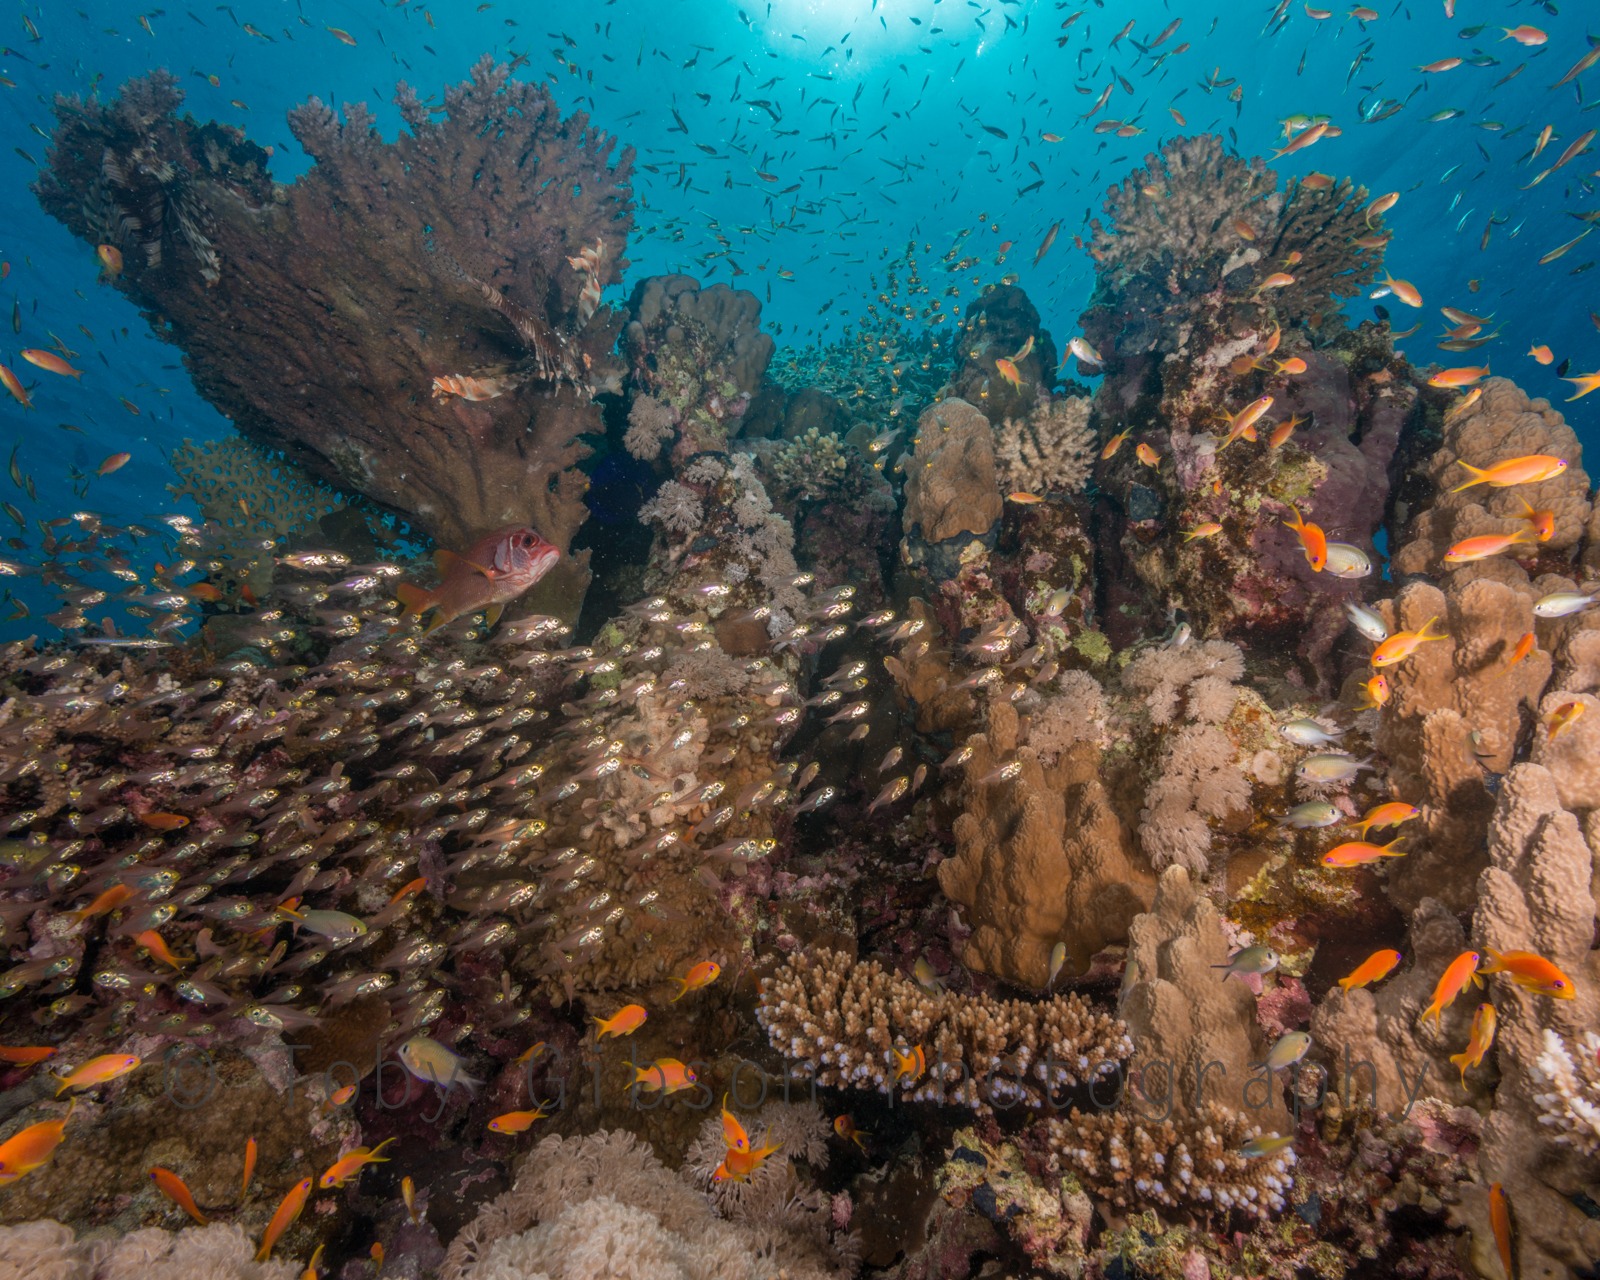 Biodiversity of coral reefs in one picture